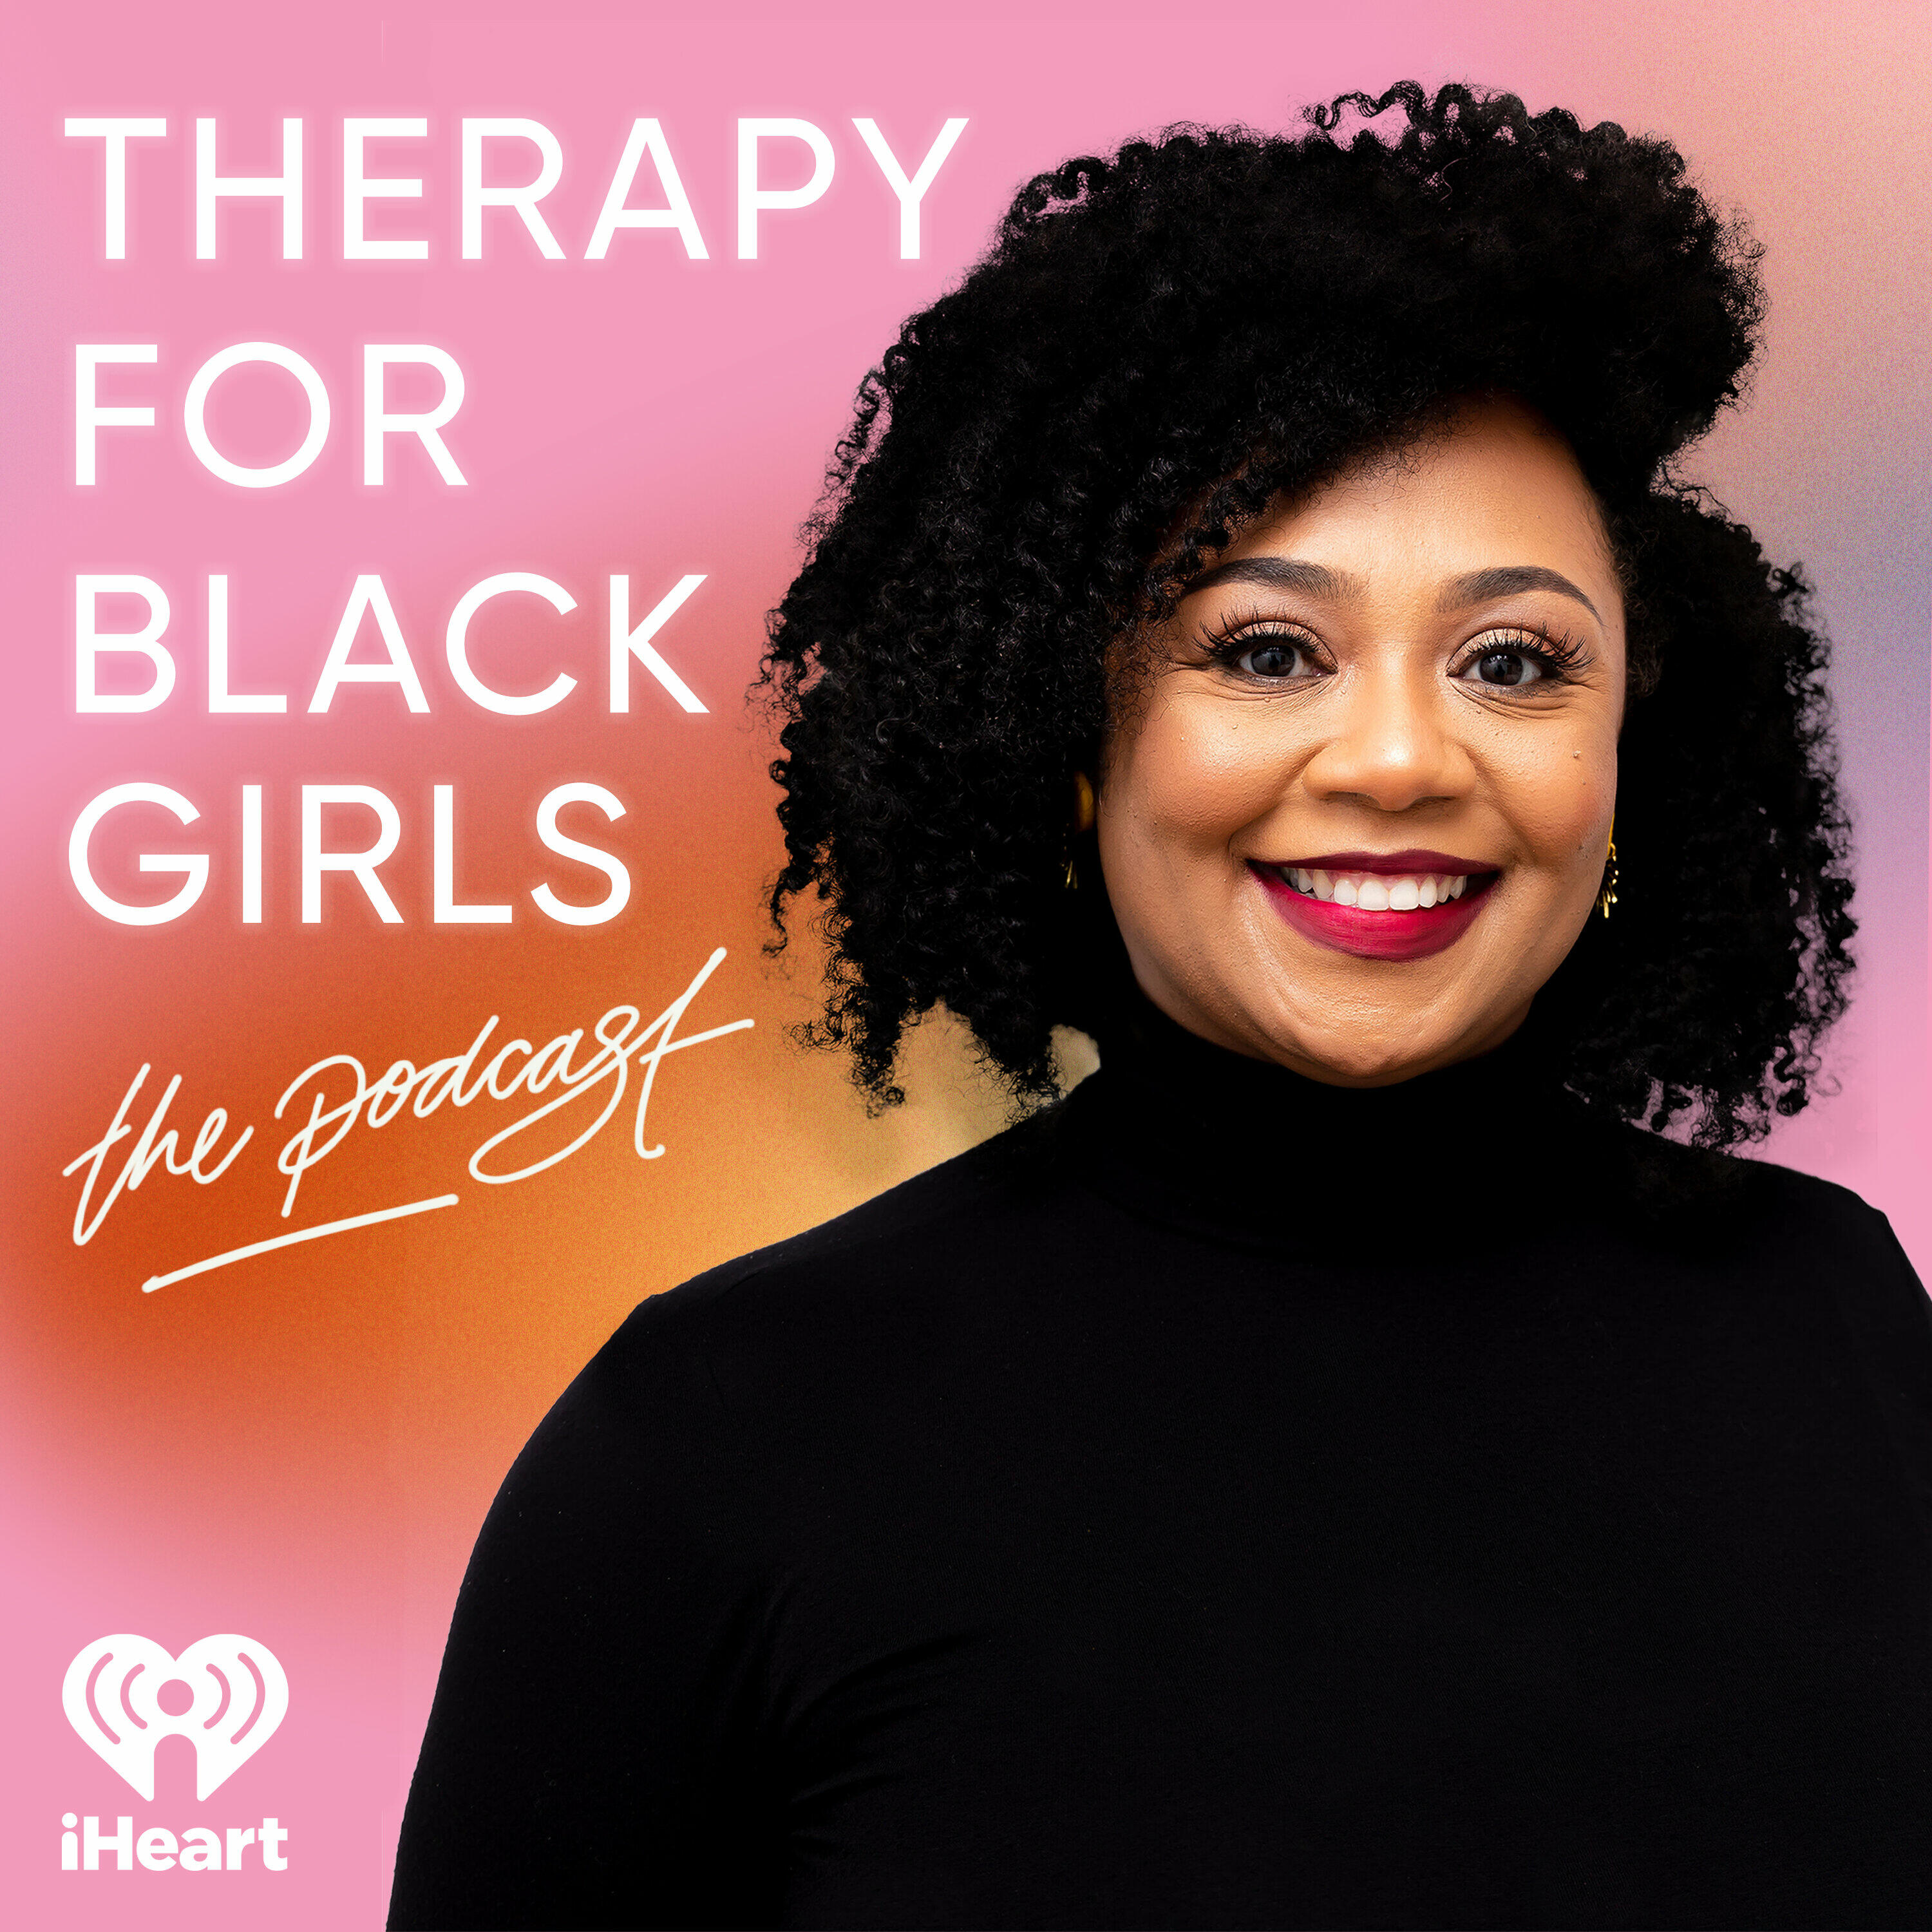 Therapy for Black Girls iHeart